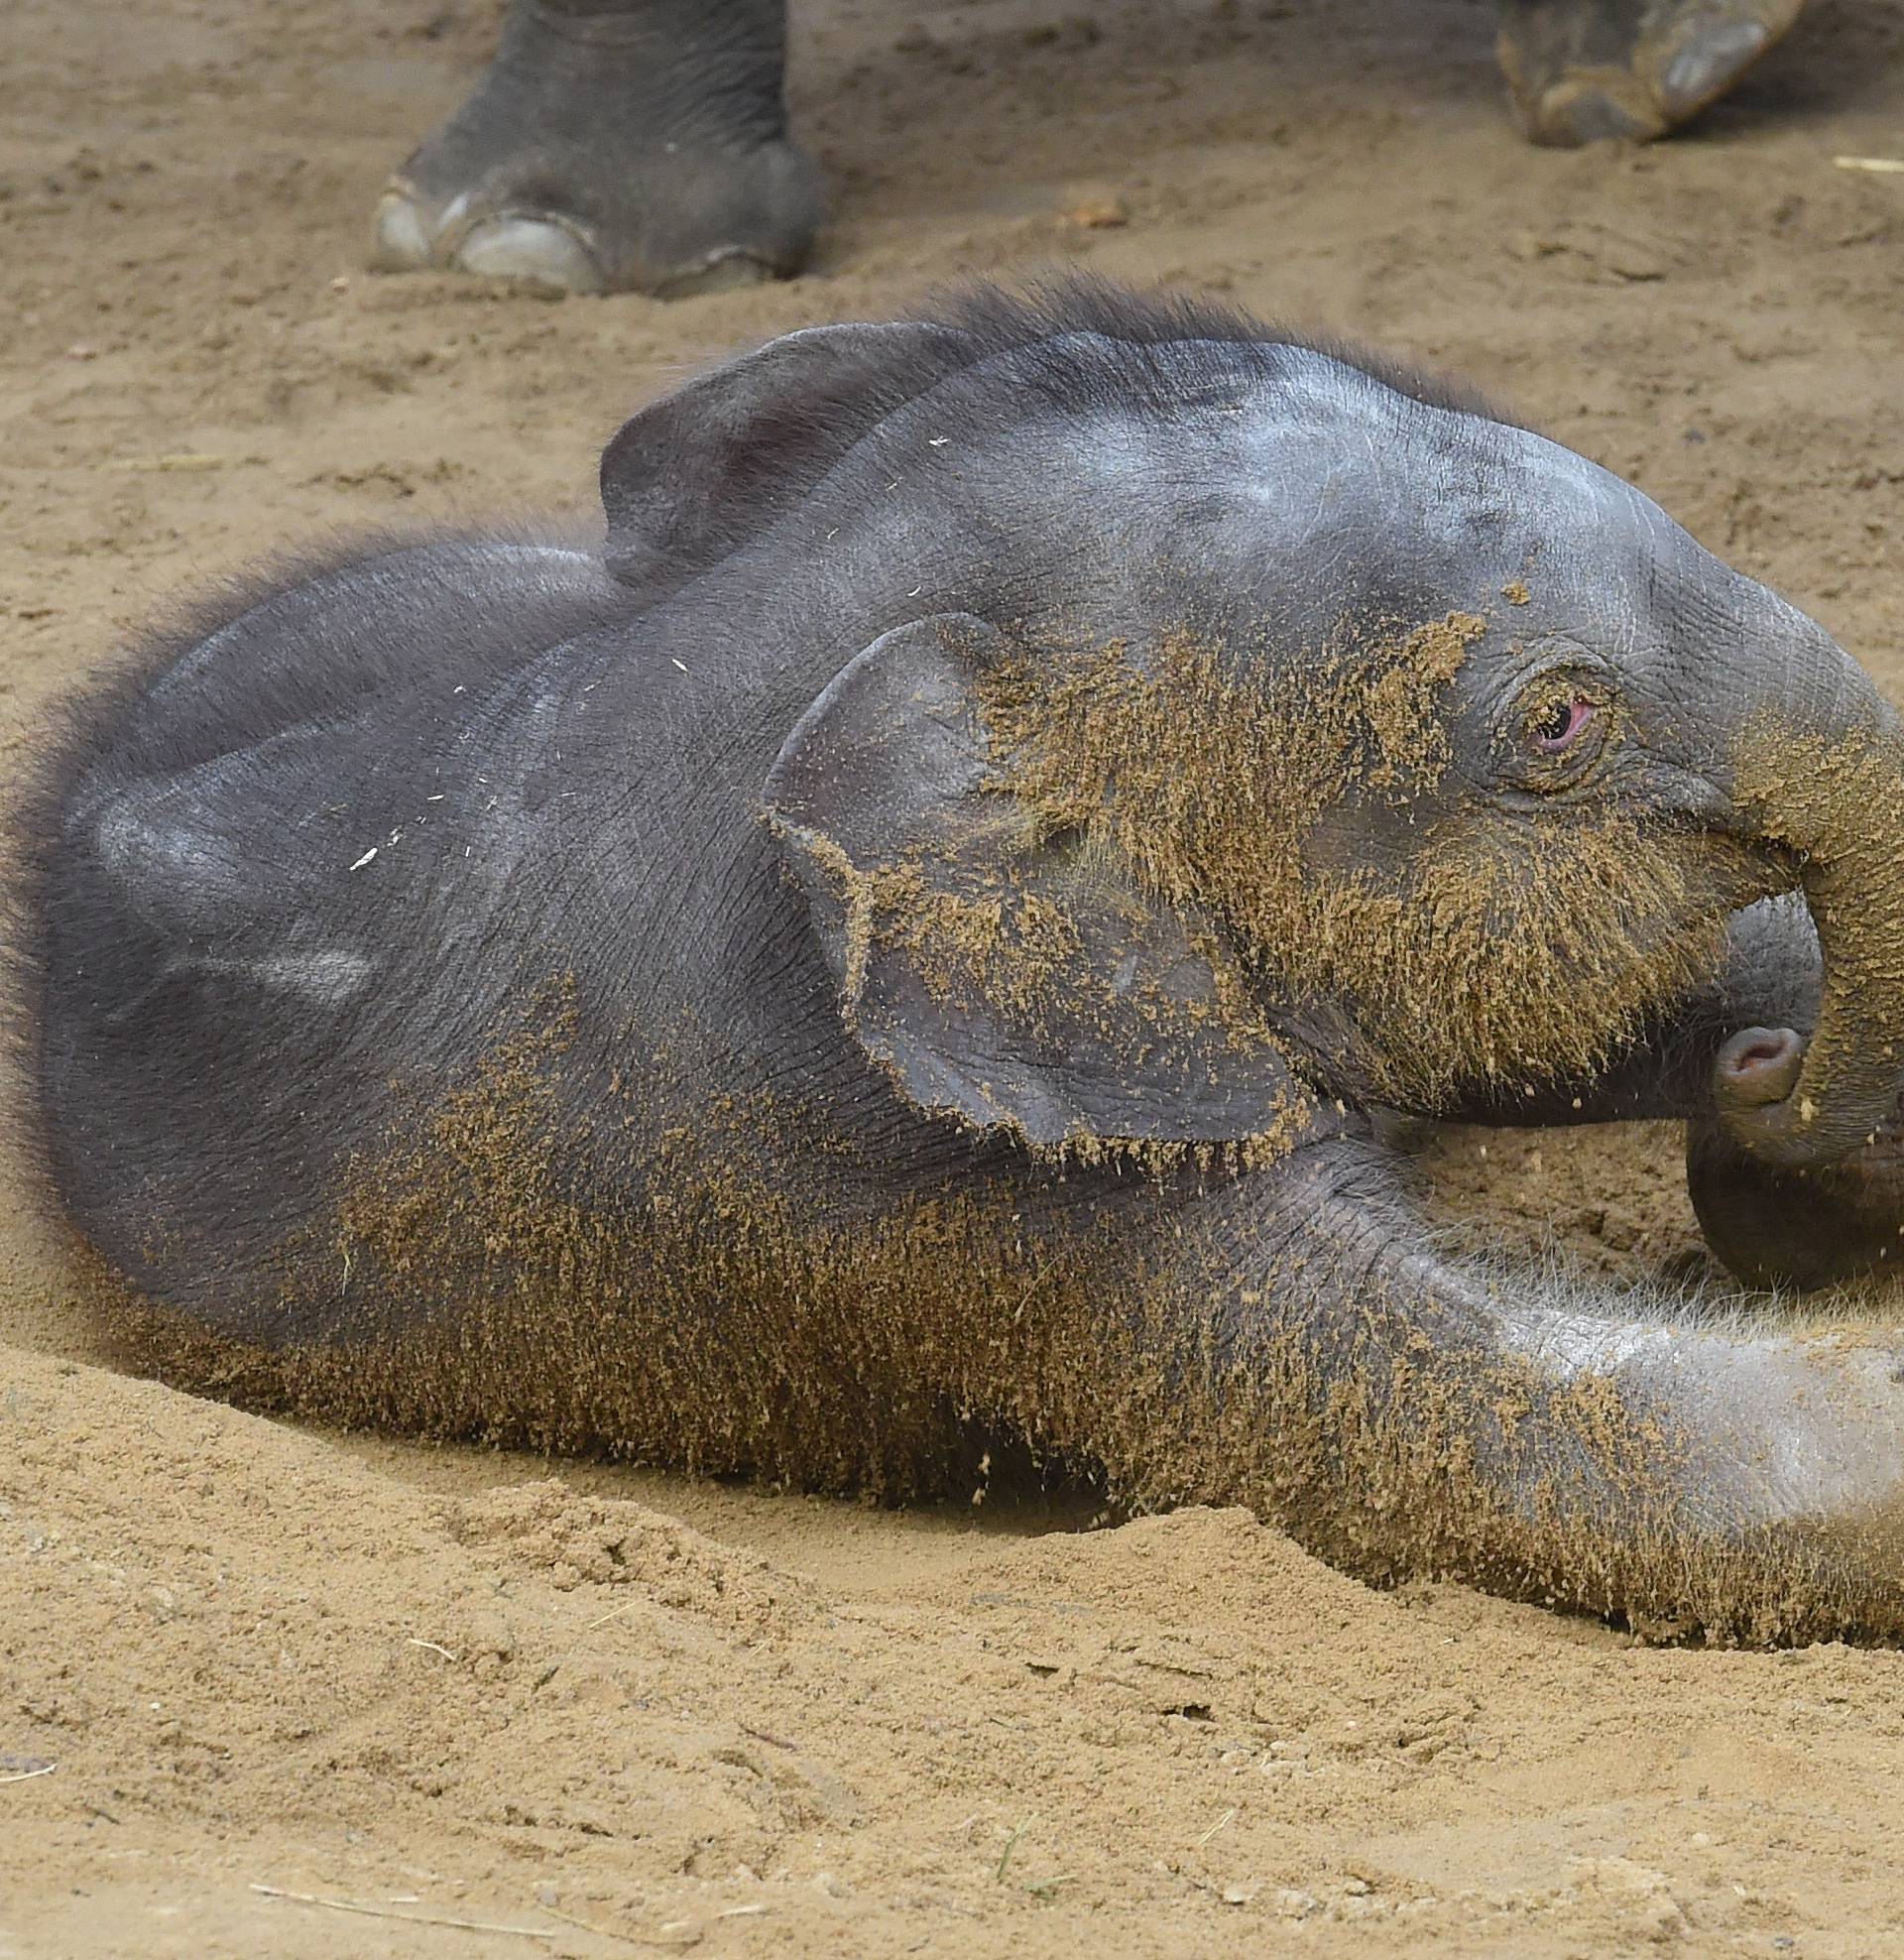 Young elephant 'Die Kleine' at Adventure Zoo Hanover